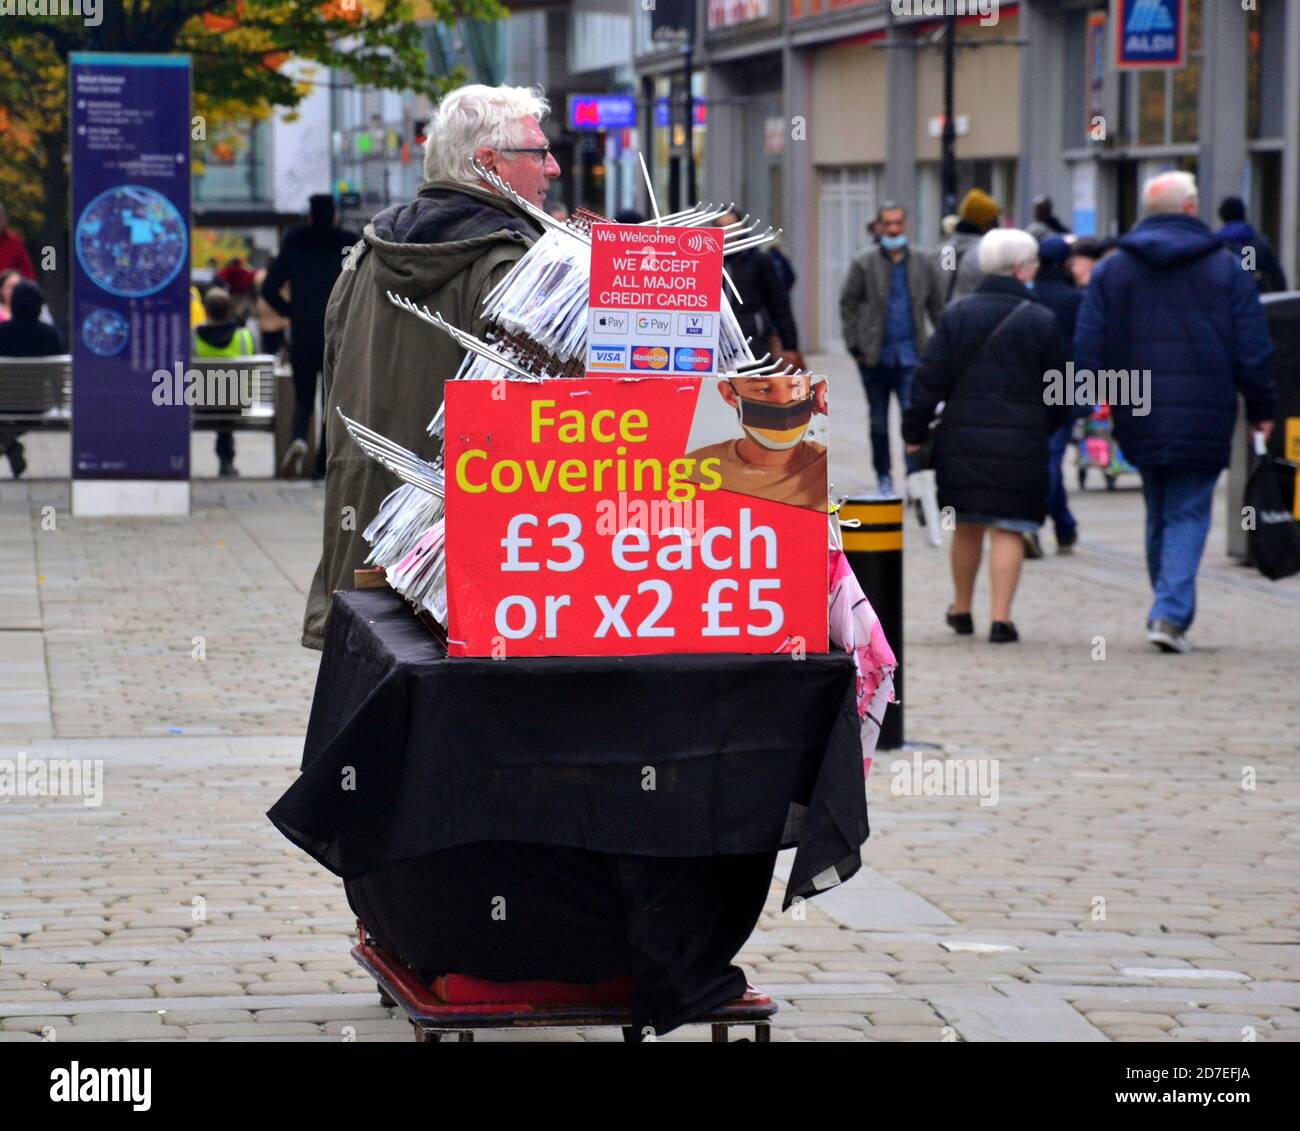 Covid 19 or coronavirus signage and advertising in Manchester, Greater Manchester, England, United Kingdom. A man sells face coverings and masks on Market Street, central Manchester. Stock Photo